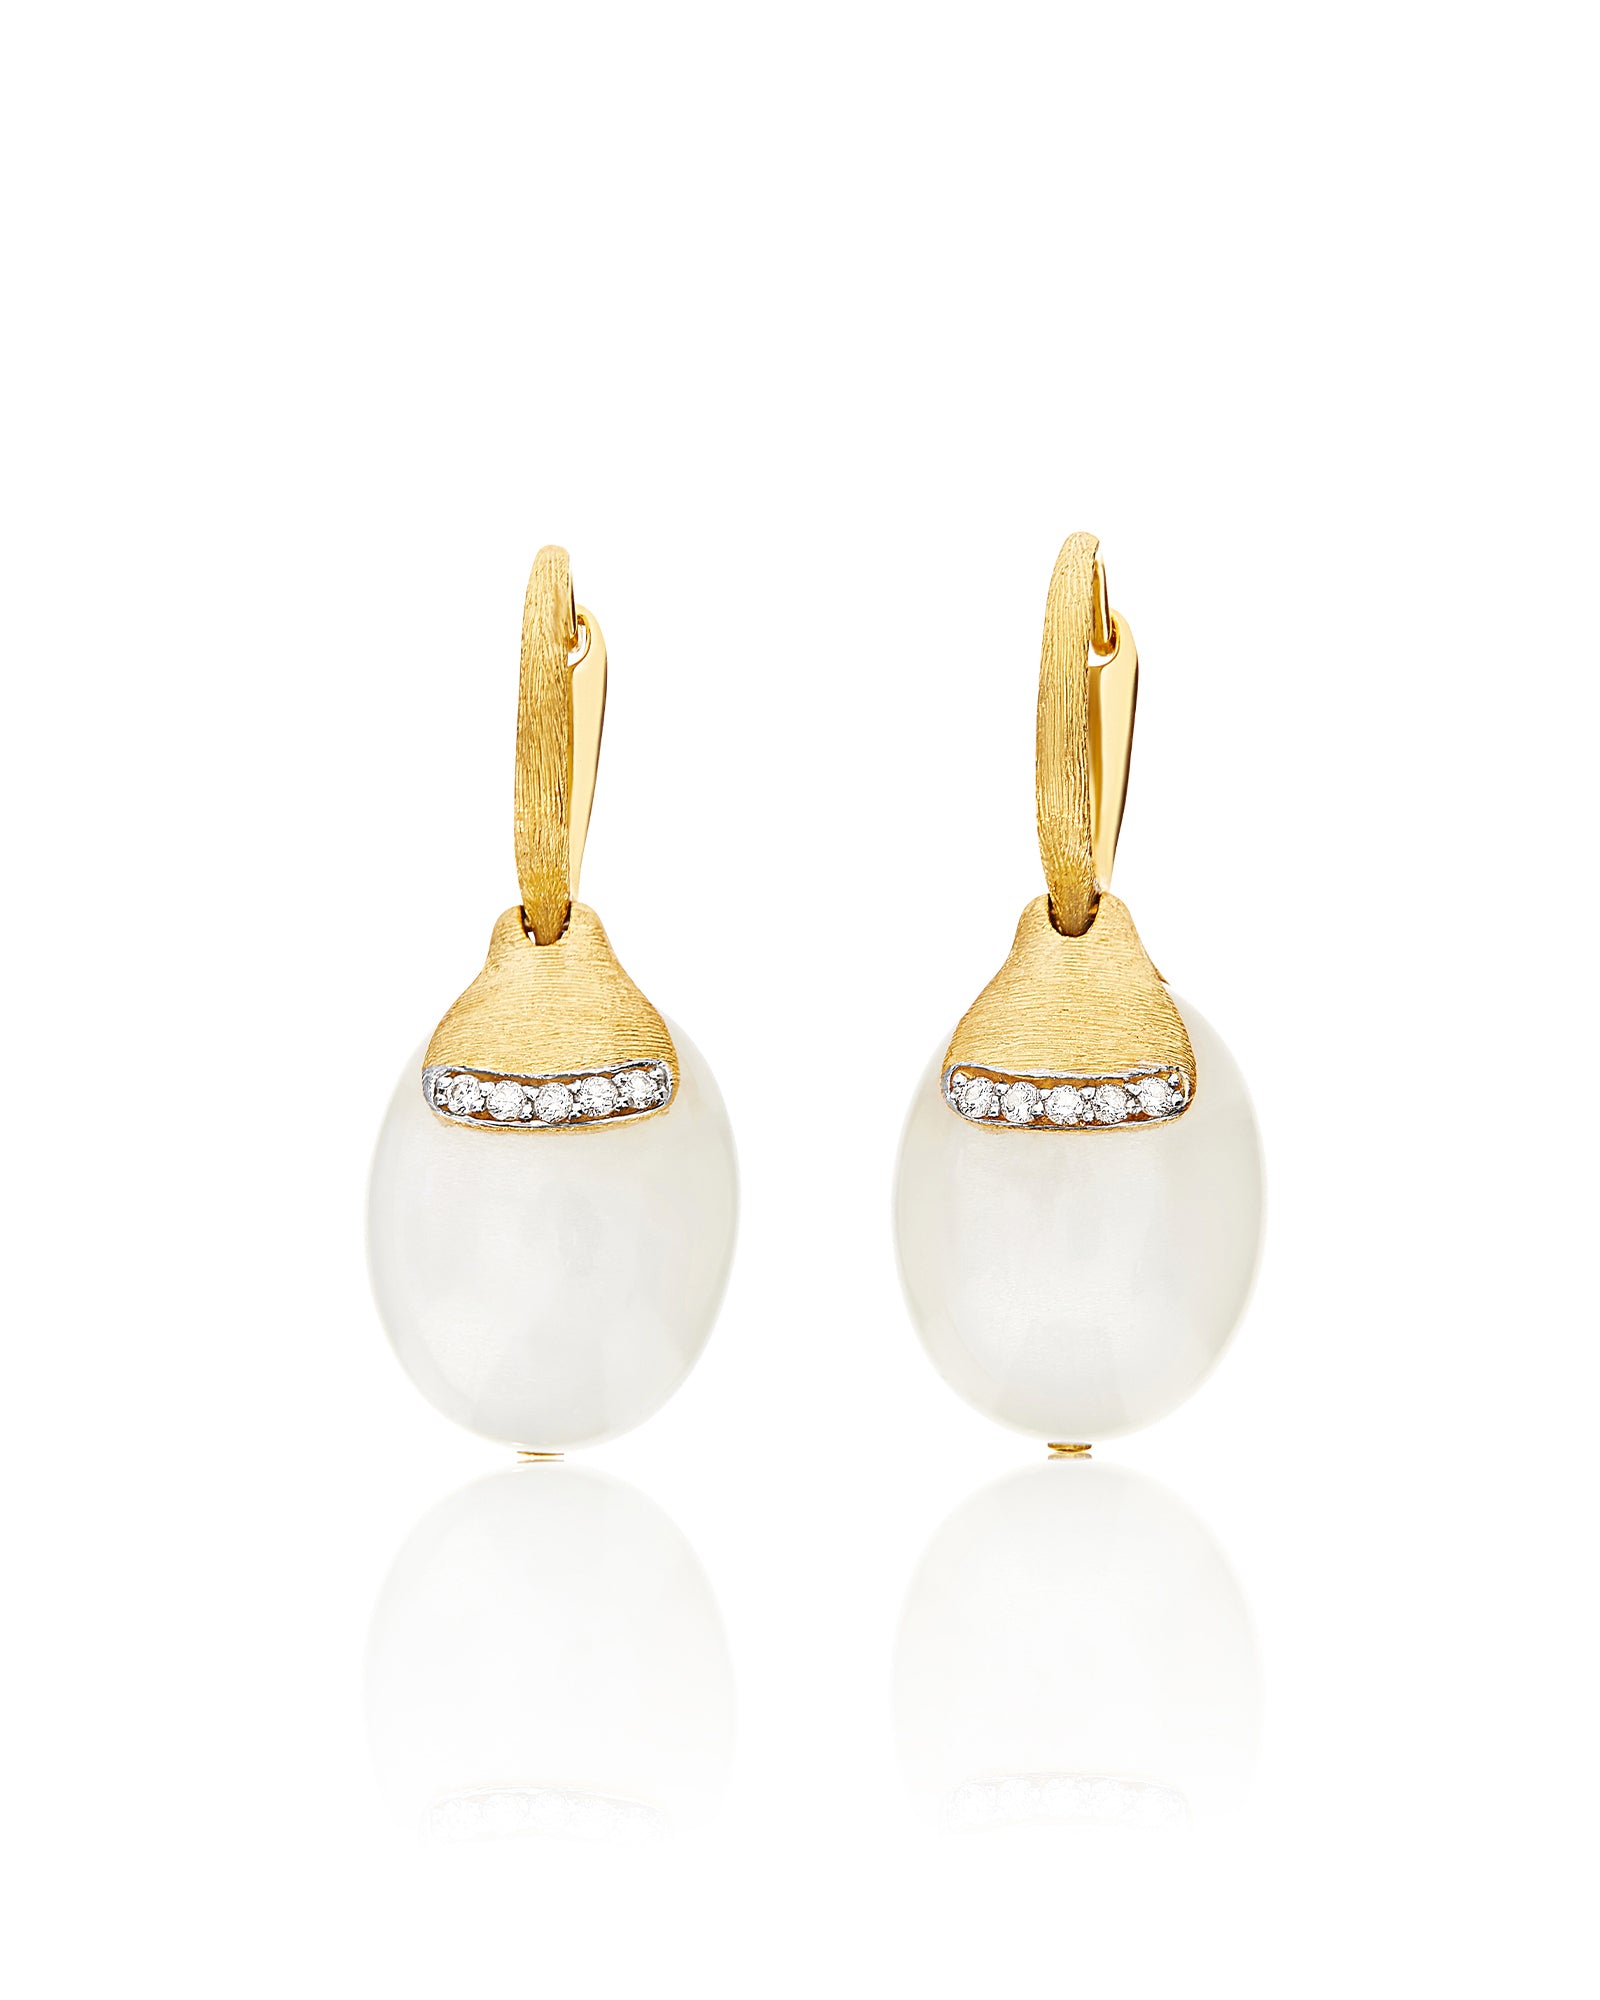 White Desert "Amulets" Ciliegine Gold and White Moonstone Ball Drop Earrings with Diamonds Details (LARGE)